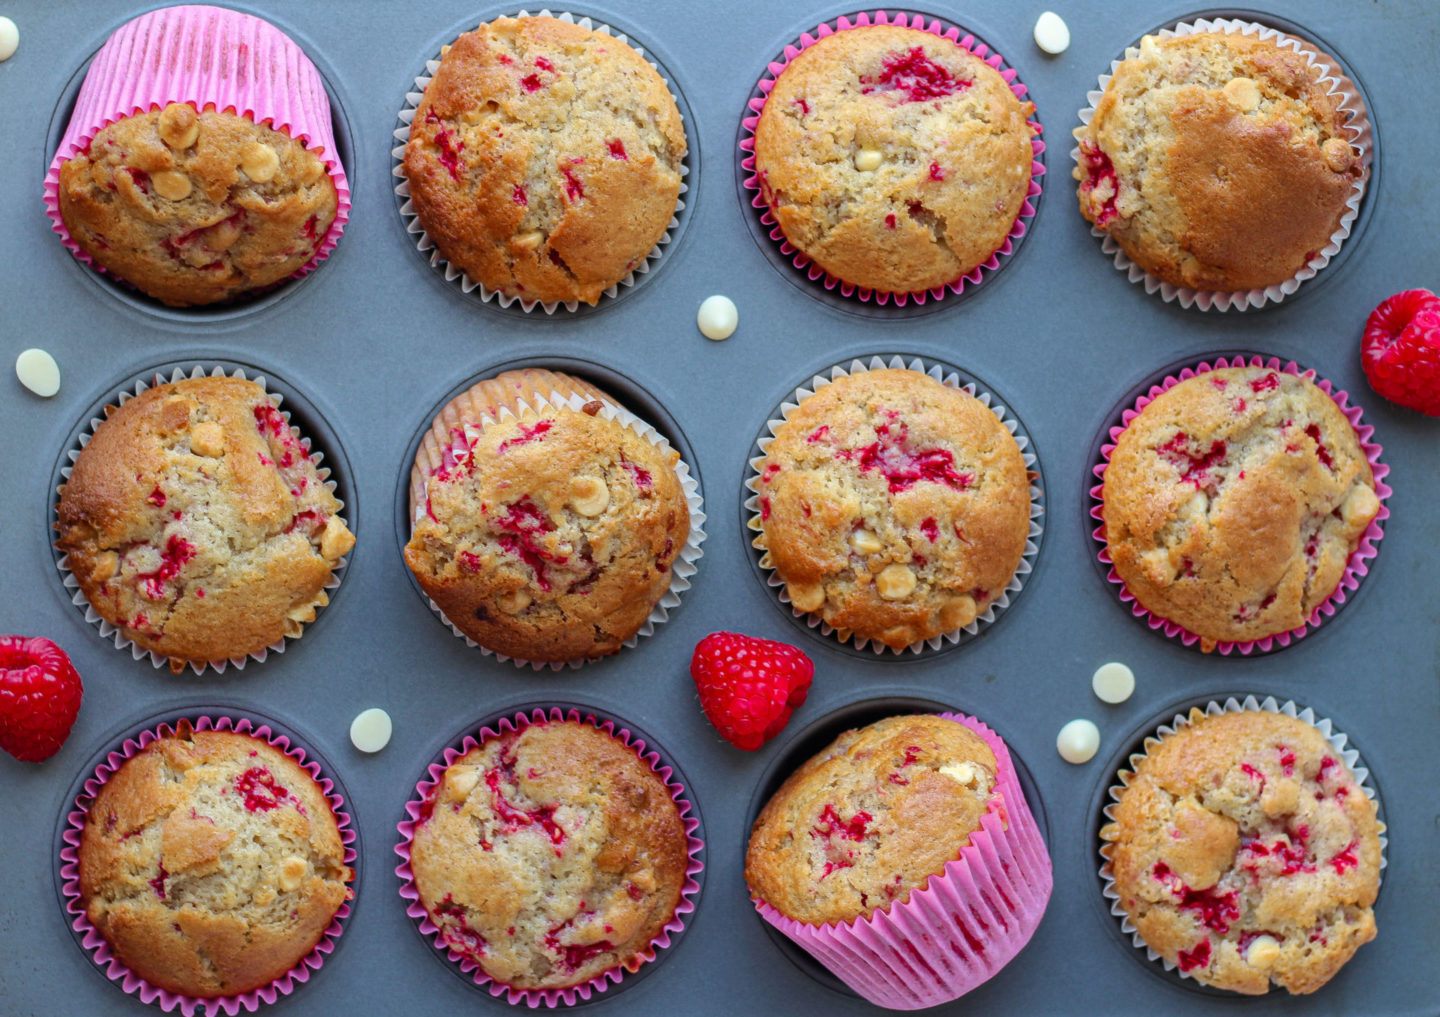 raspberry white chocolate muffins placed in a muffin tray decorated with some fresh raspberries and white chocolate chips